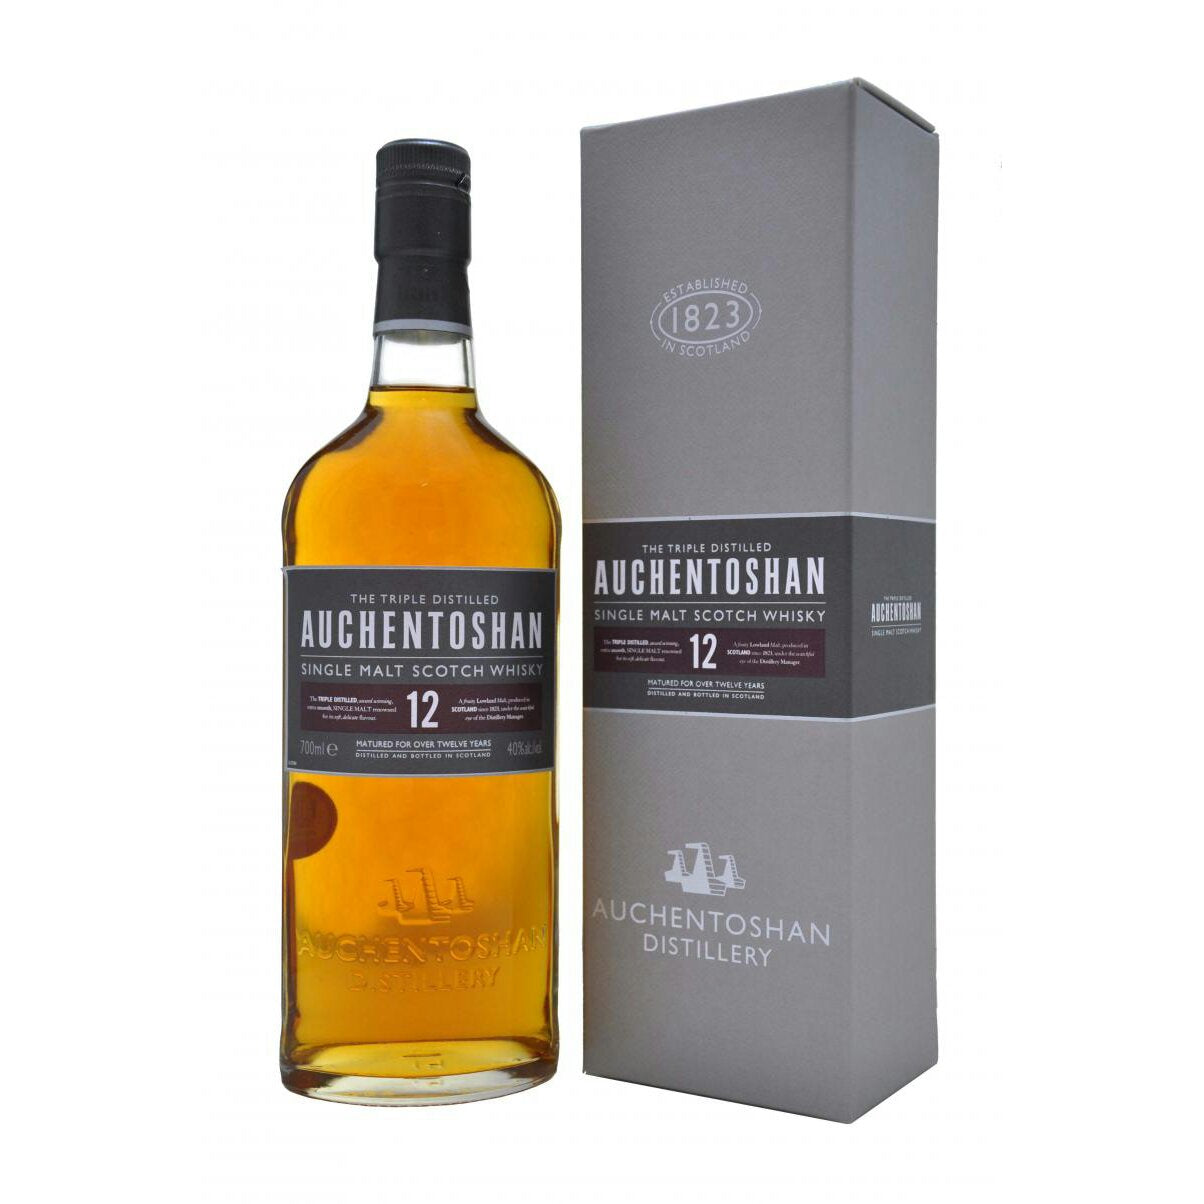 Years Malt Old Auchentoshan Whisky The Single Scotch – Collective Guild 12